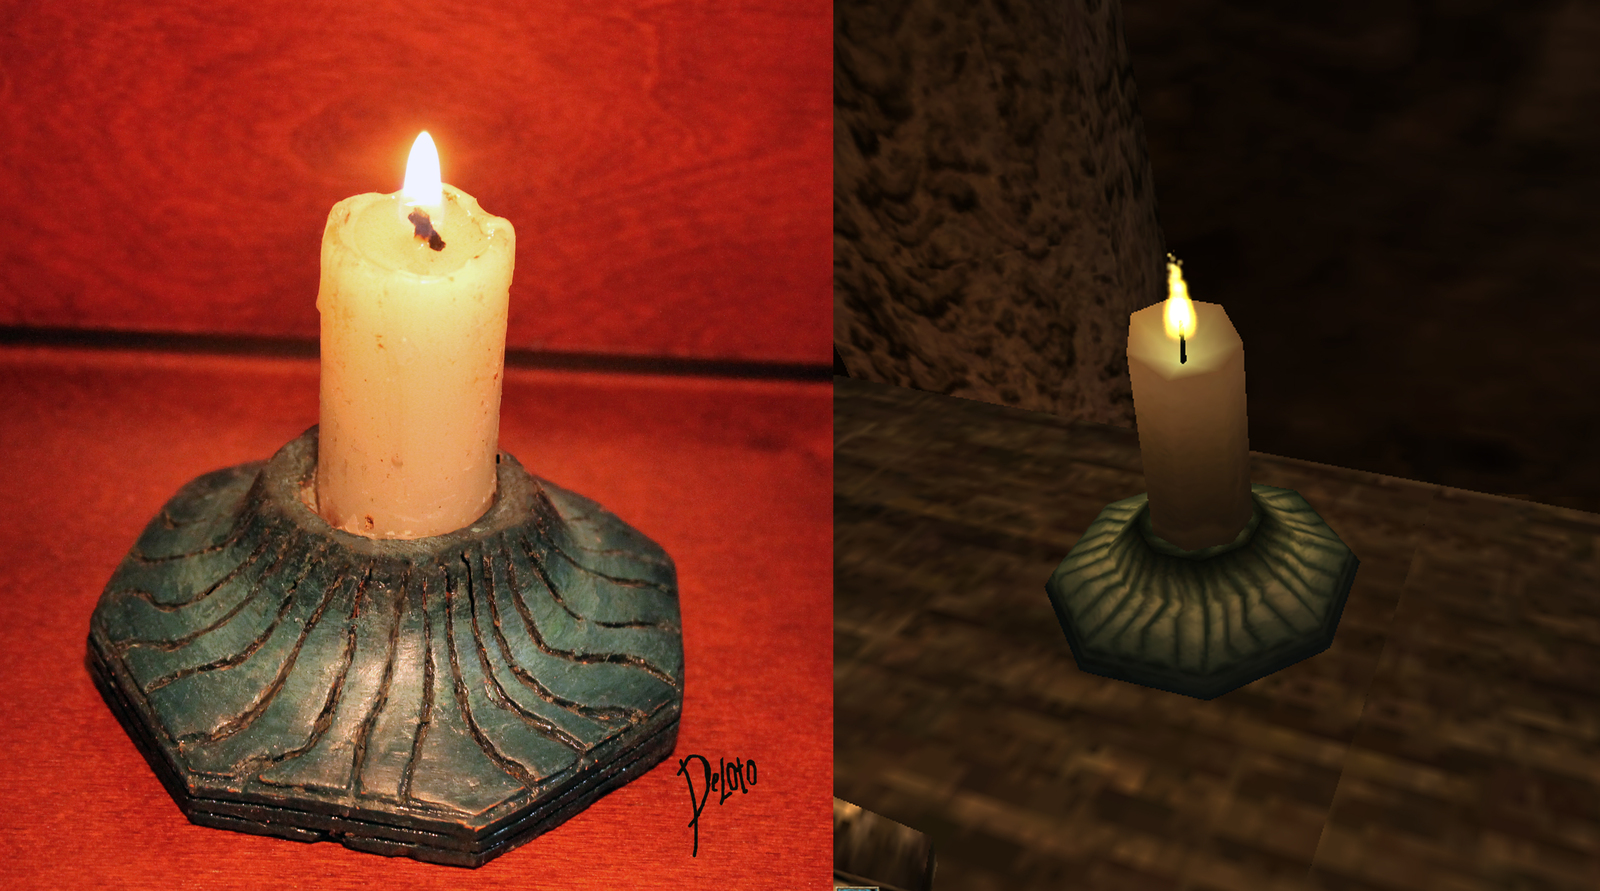 Candles from the game TES III: Morrowind - My, The elder scrolls, , , Morrowind, , Deloto, Longpost, The Elder Scrolls III: Morrowind